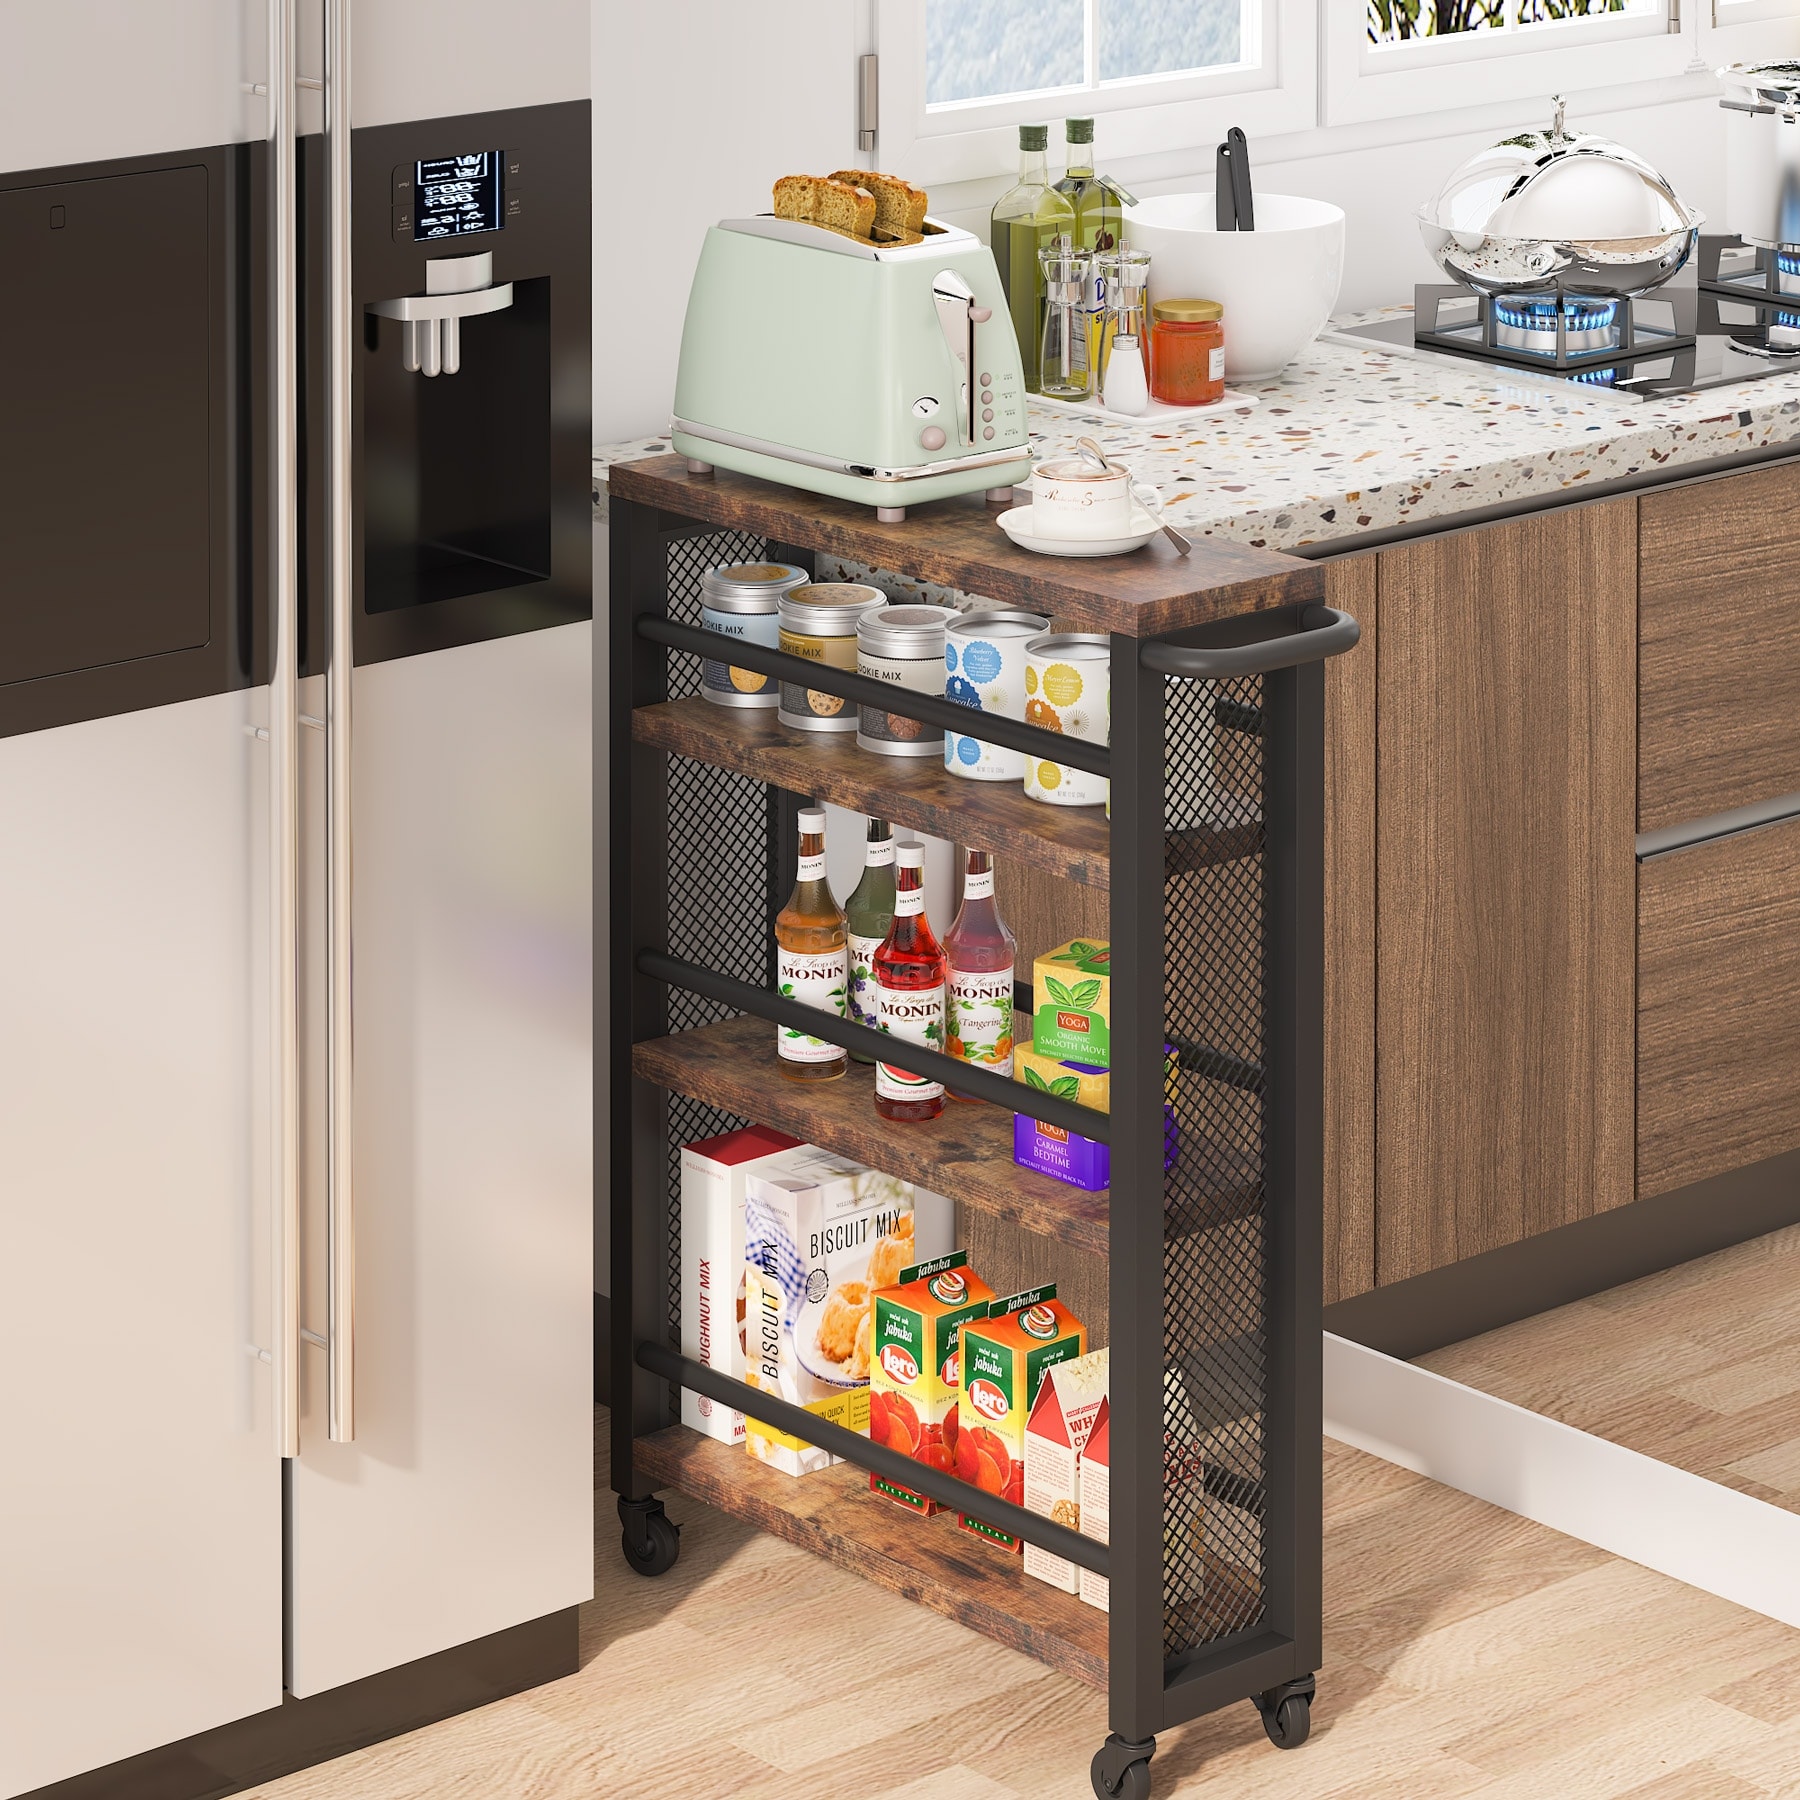 How We Improved Our Kitchen with a Tool Cart & Vertical Storage